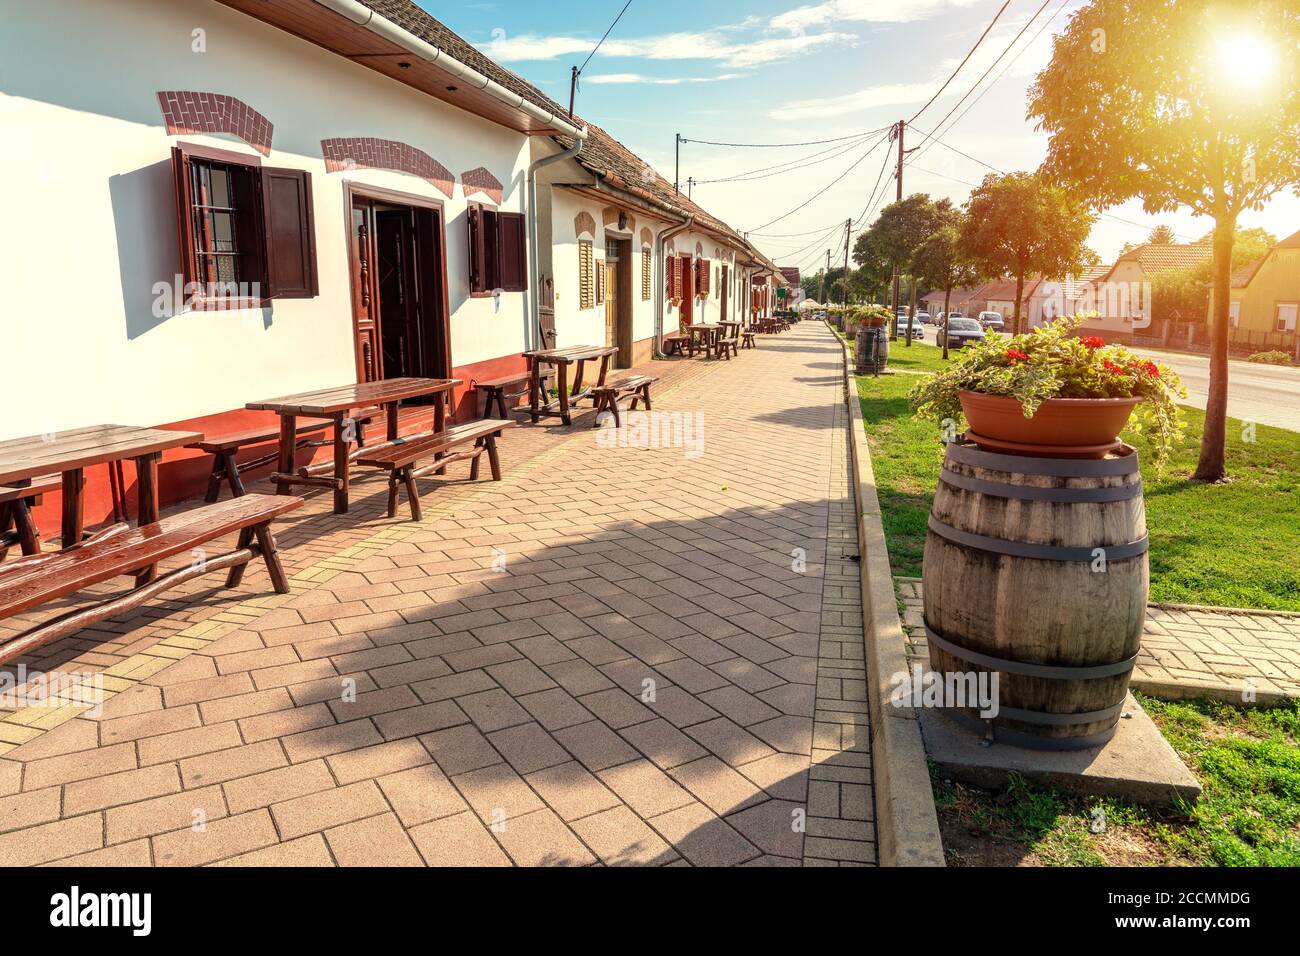 cityscape of Villany Hungary with barrels and cellers on the walking street Stock Photo